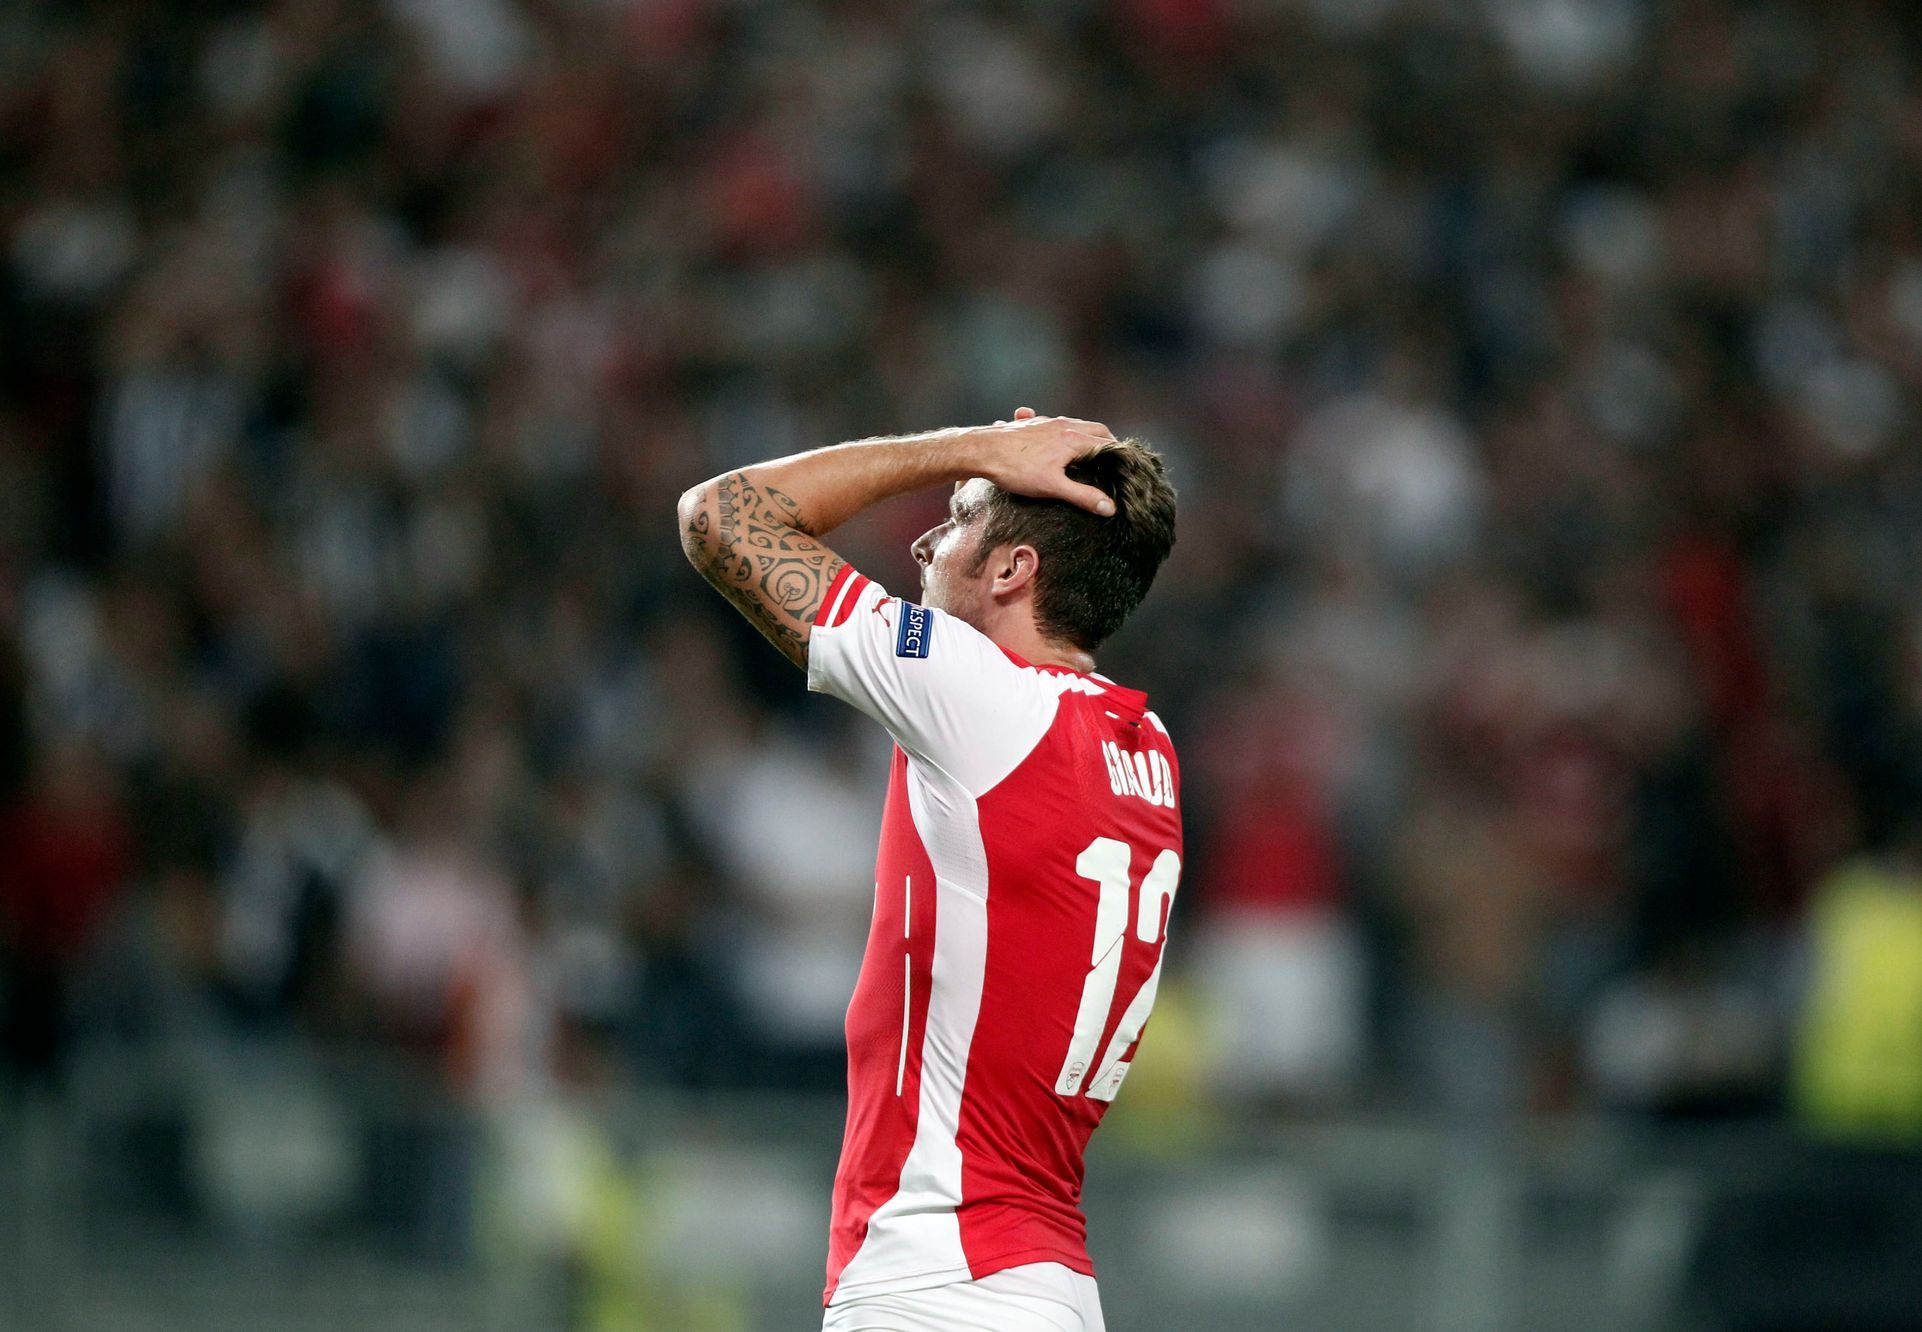 Arsenal's Grioud reacts during the first leg of their Champions League qualifying soccer match aganist Besiktas